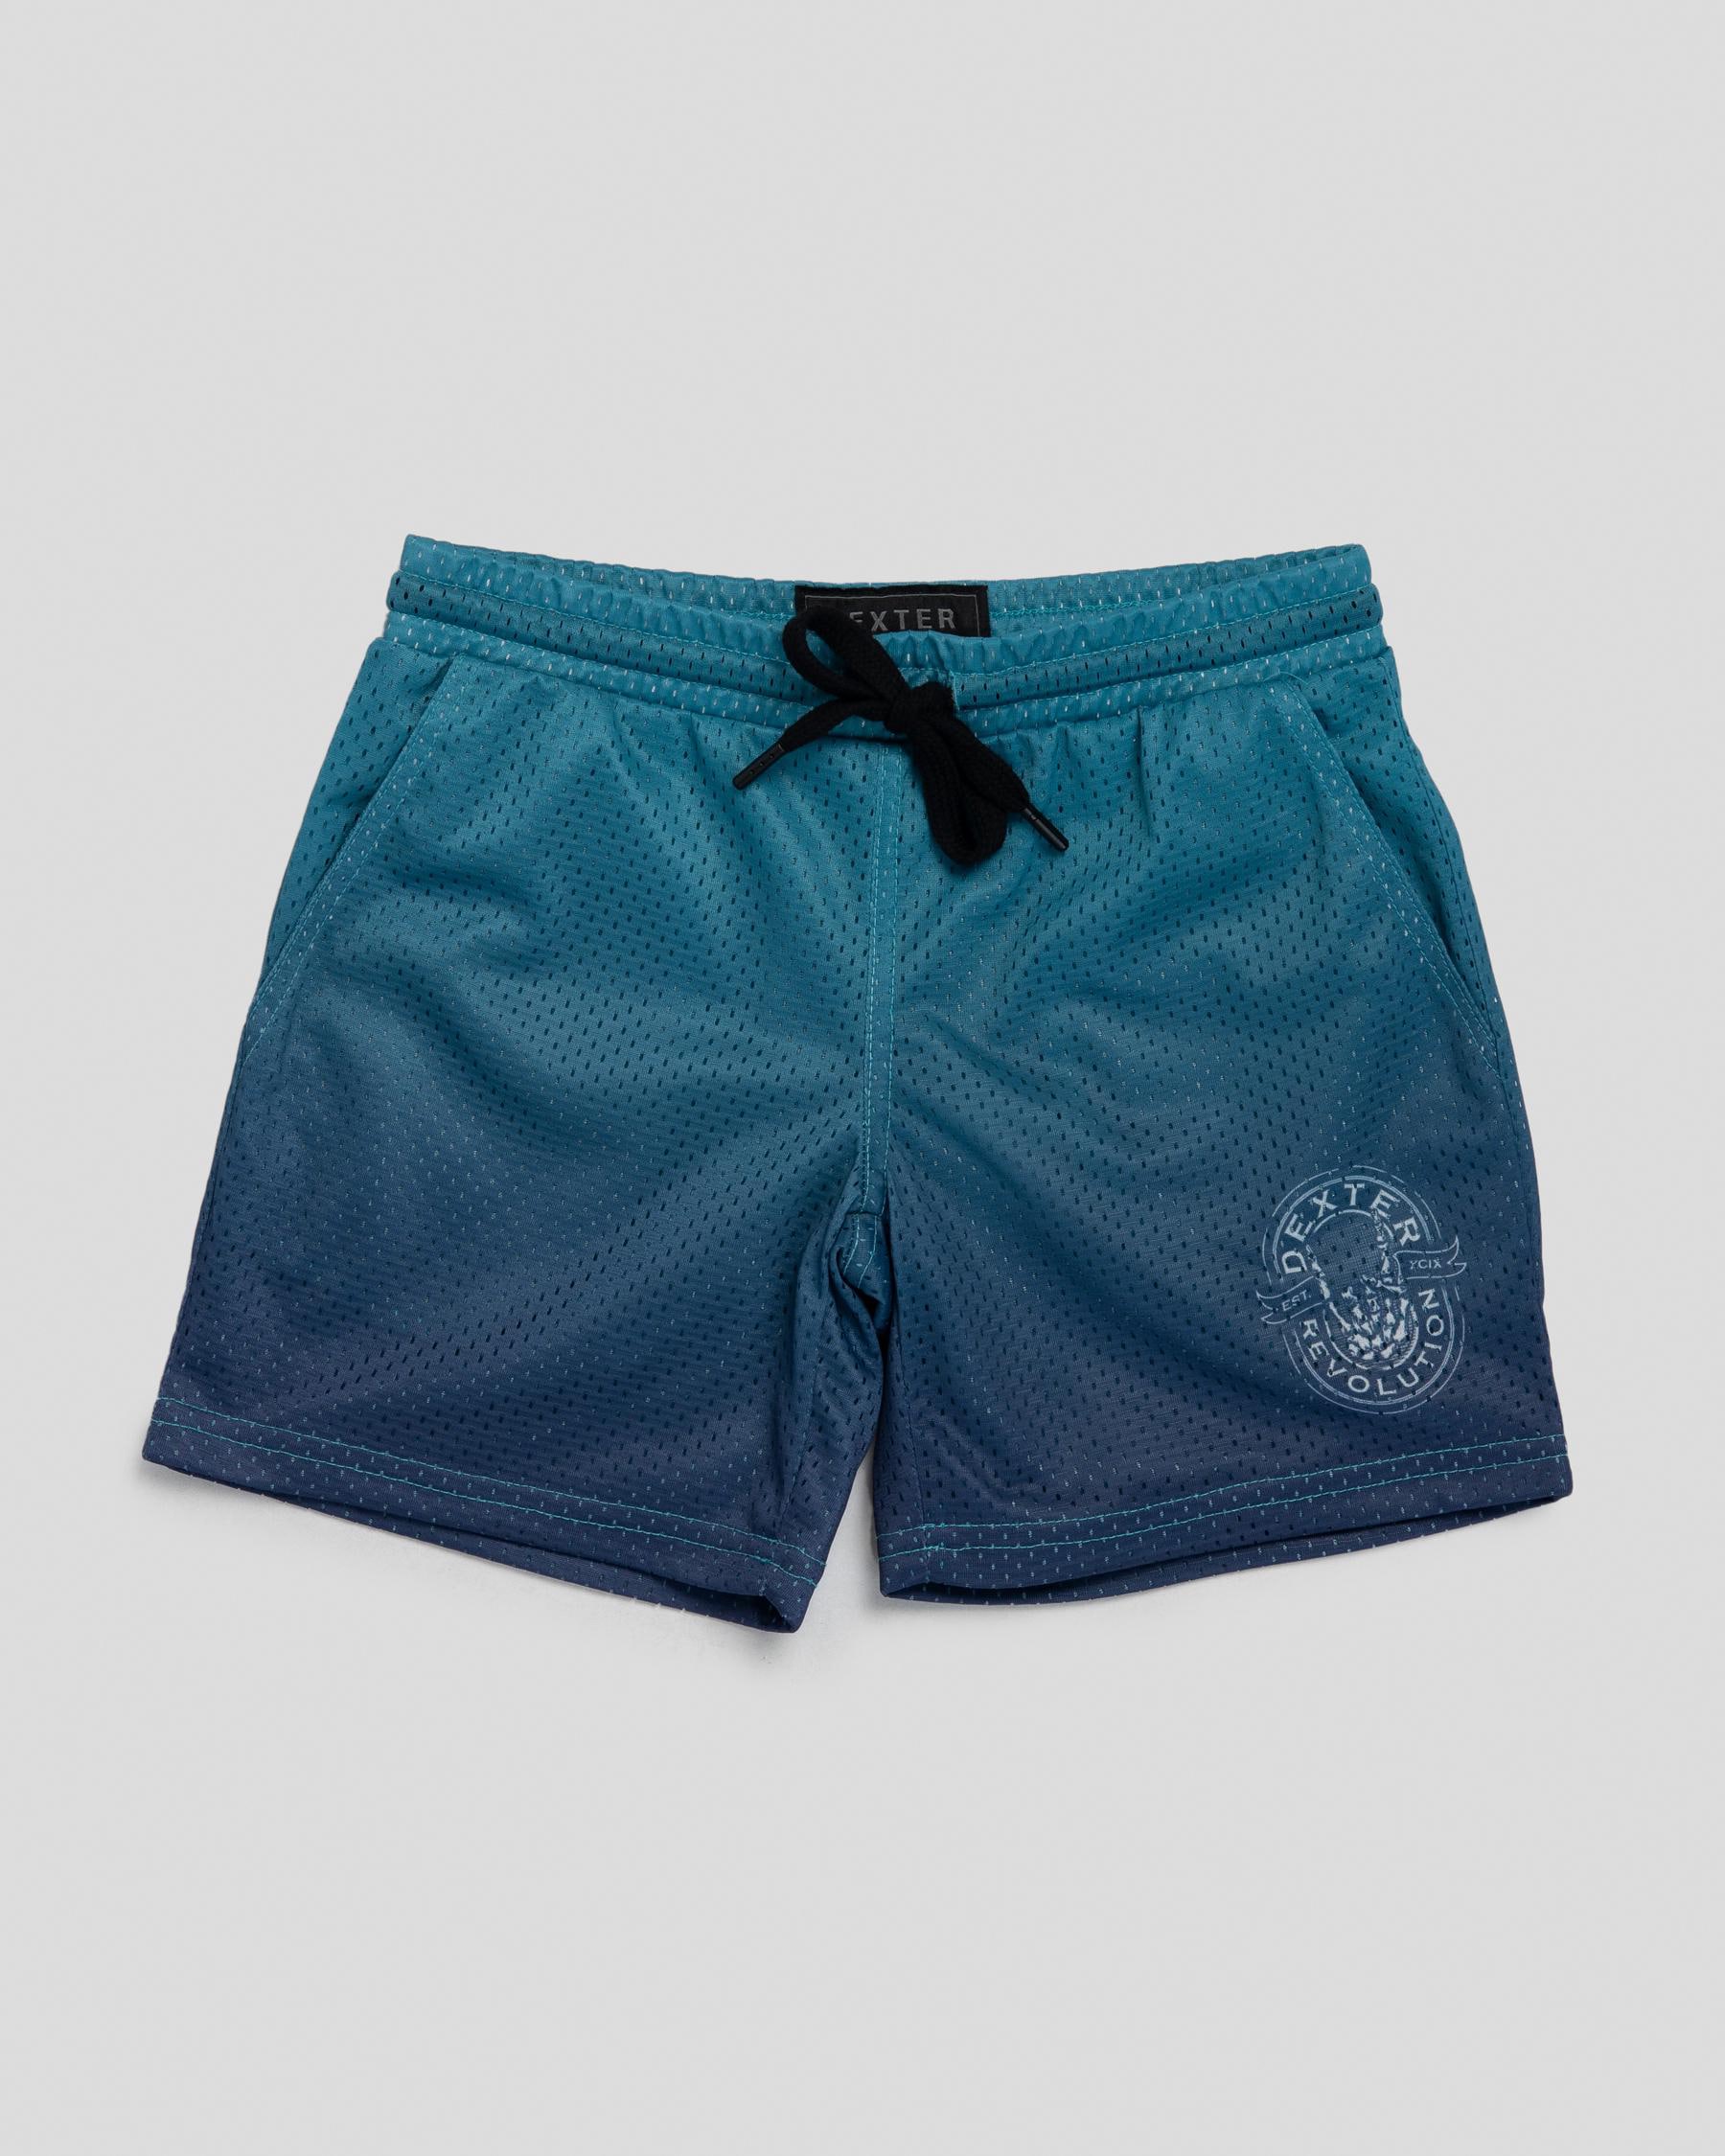 Dexter Toddlers' Blended Shorts In Blue/indigo - Fast Shipping & Easy ...